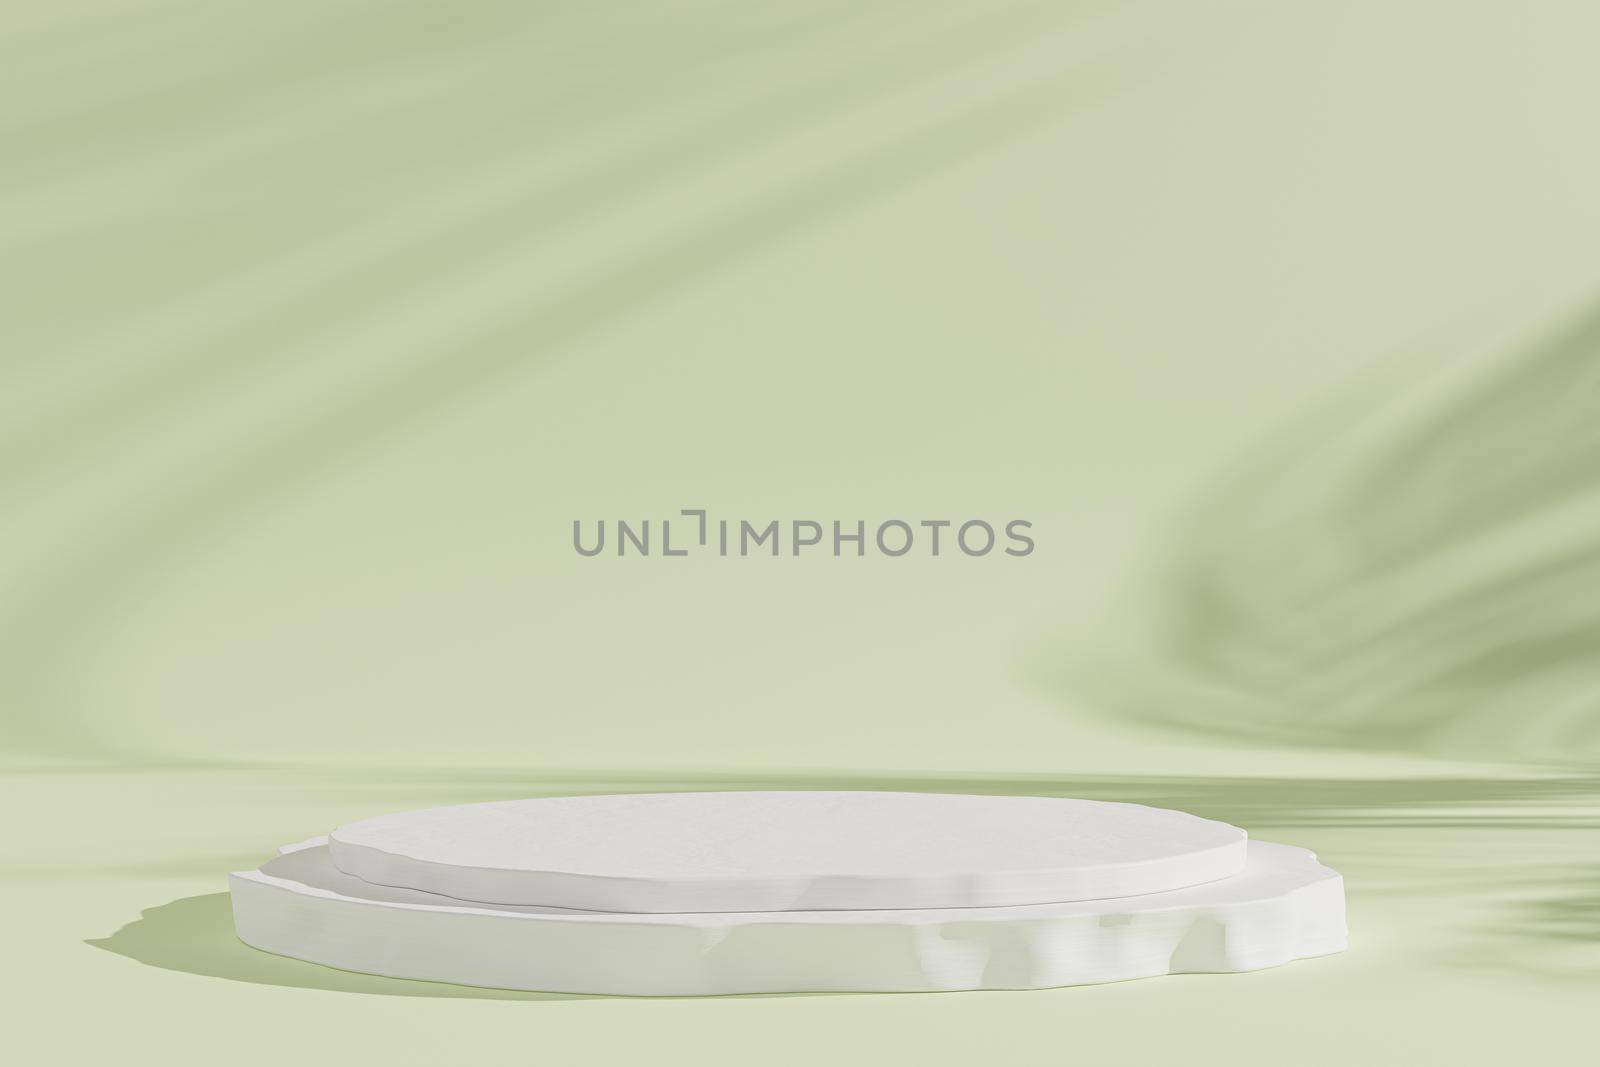 Podium or pedestal for products or advertising on green background with leaves shadows, minimal 3d illustration render by Frostroomhead